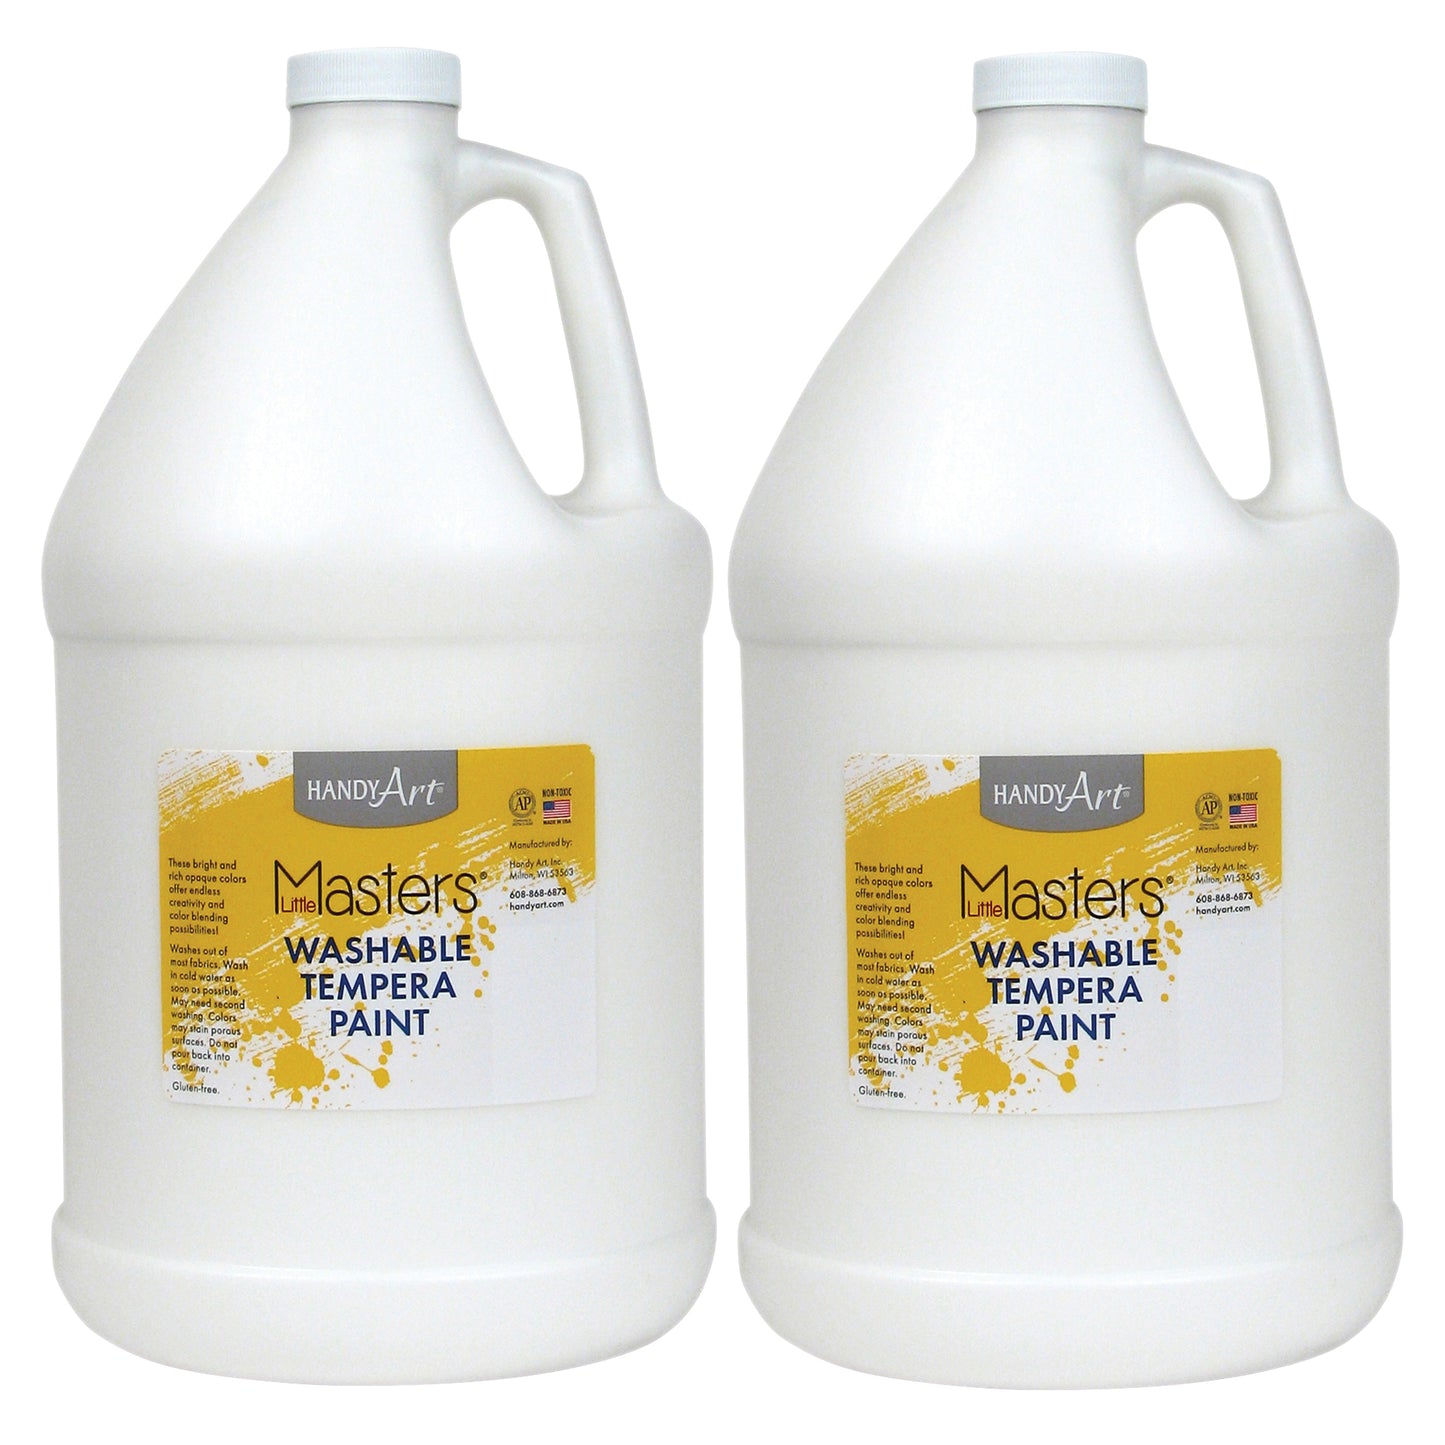 Little Masters® Washable Tempera Paint, White, Gallon, Pack of 2